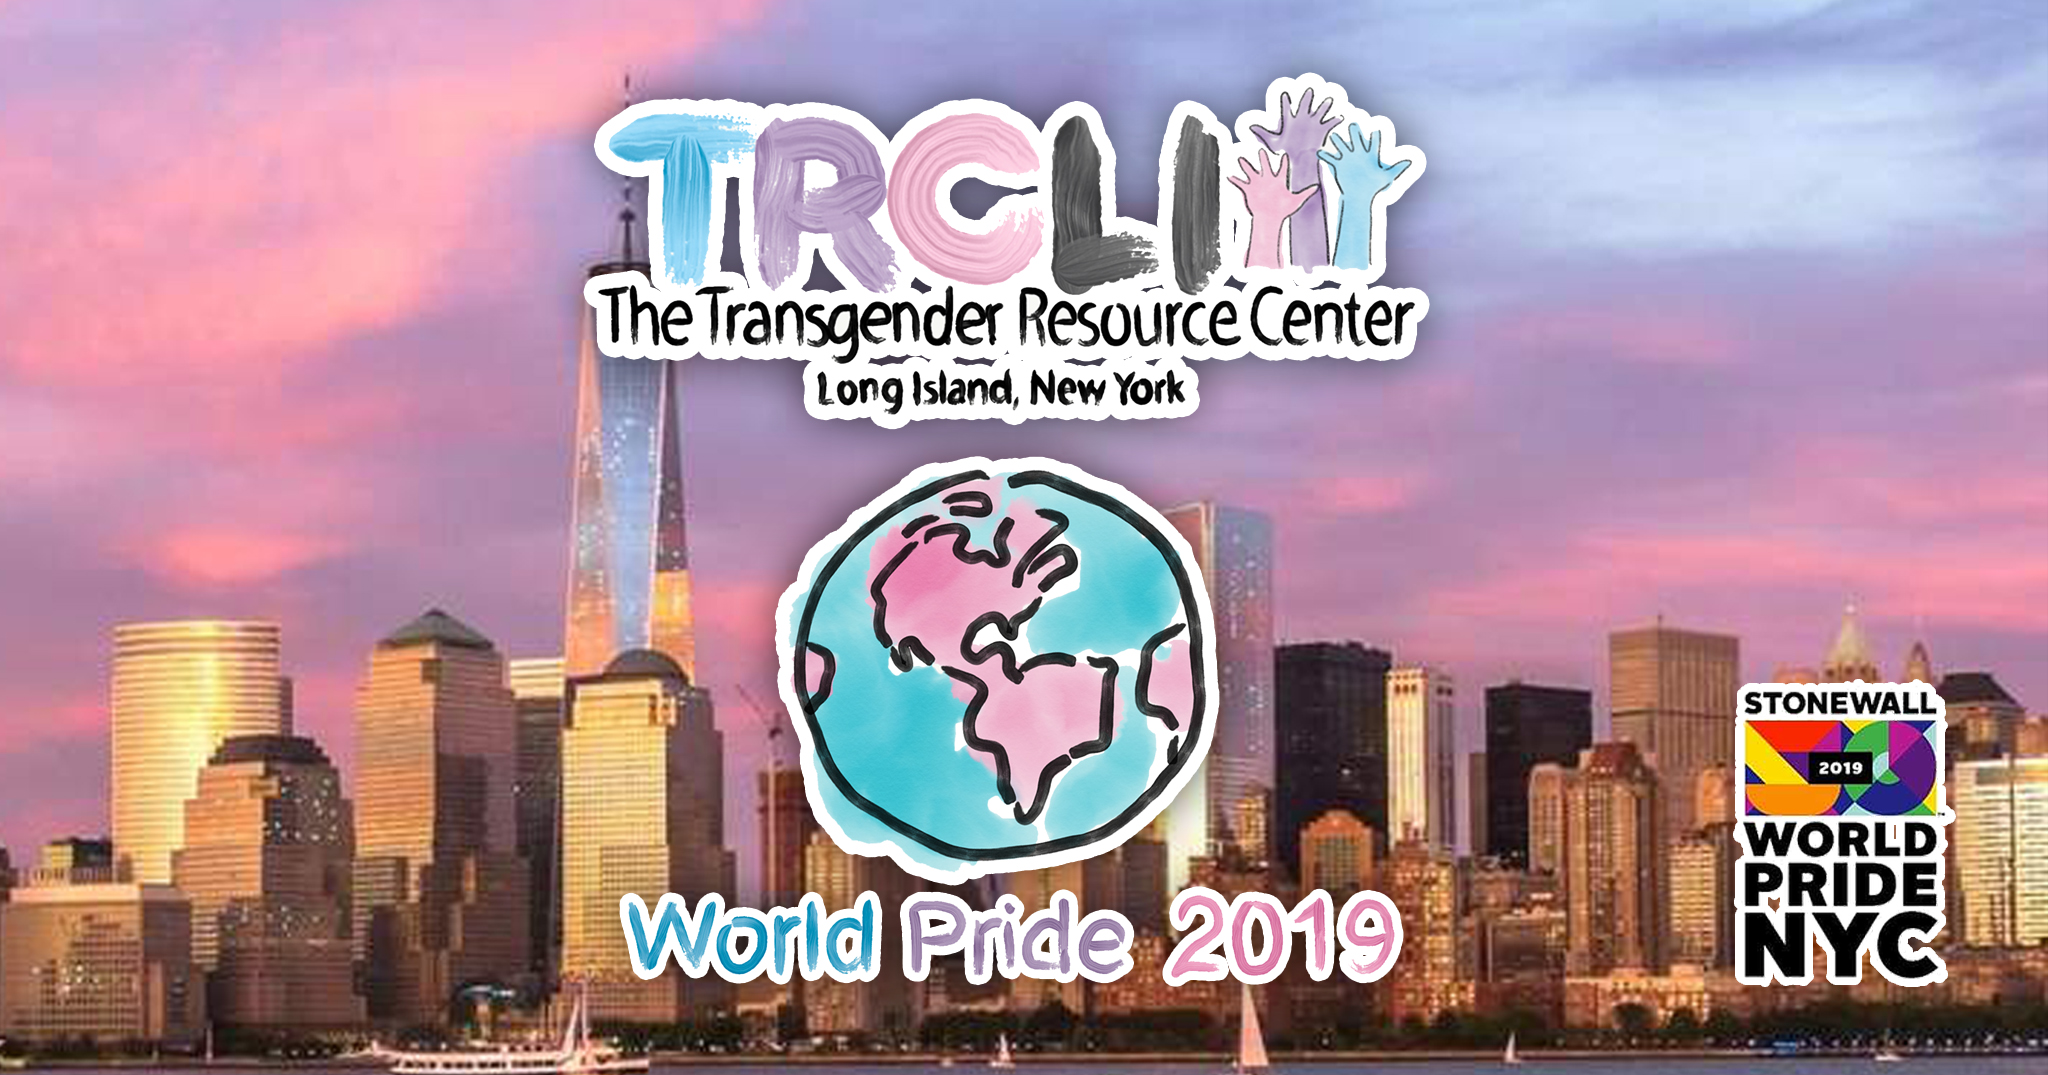 March with TRCLI at NYC World Pride 2019